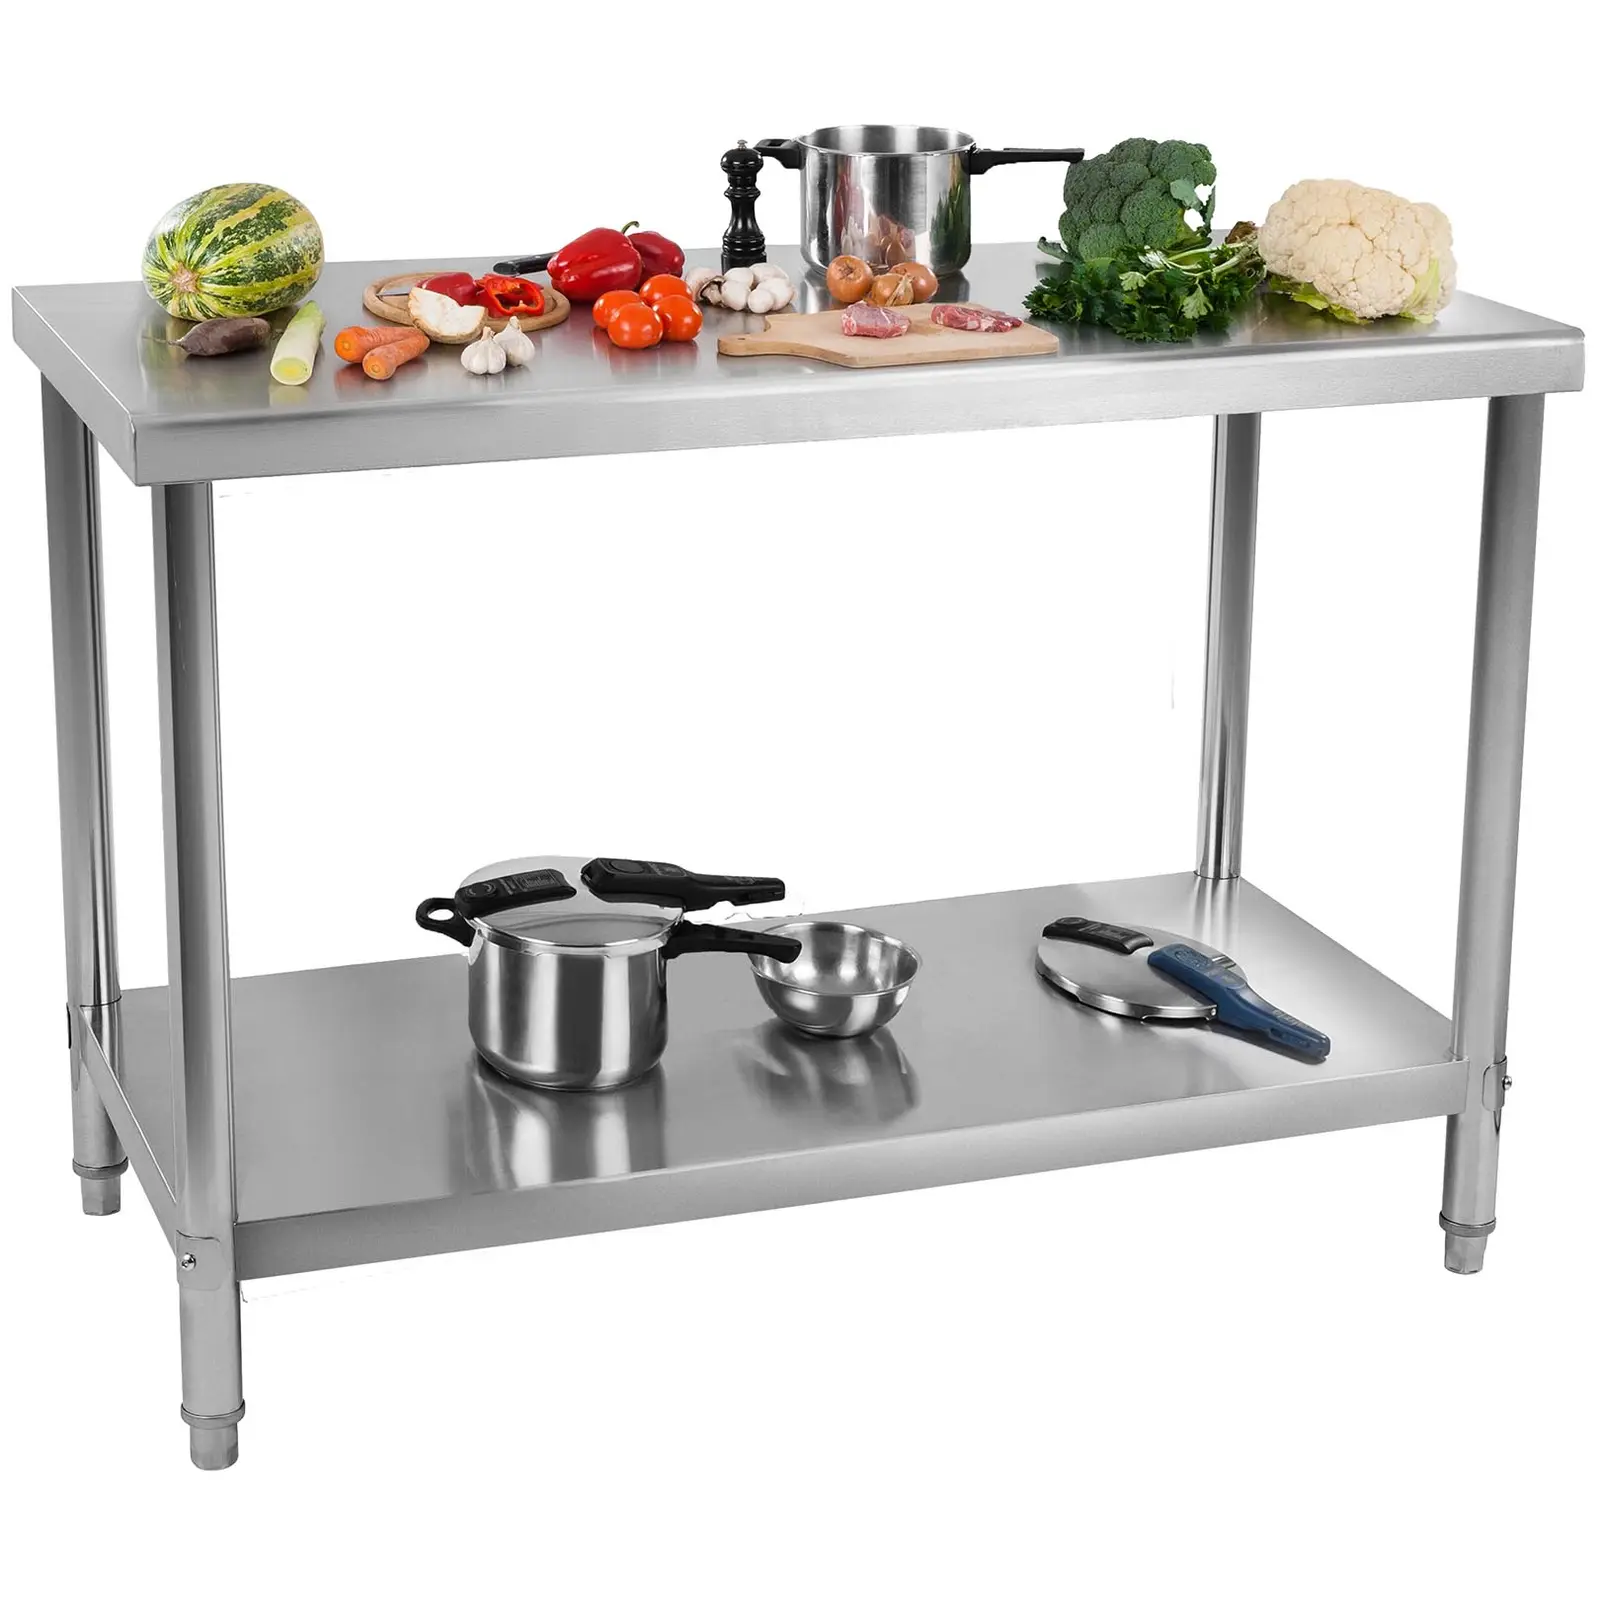 Stainless Steel Table - 100 x 60 cm - 114 kg load capacity